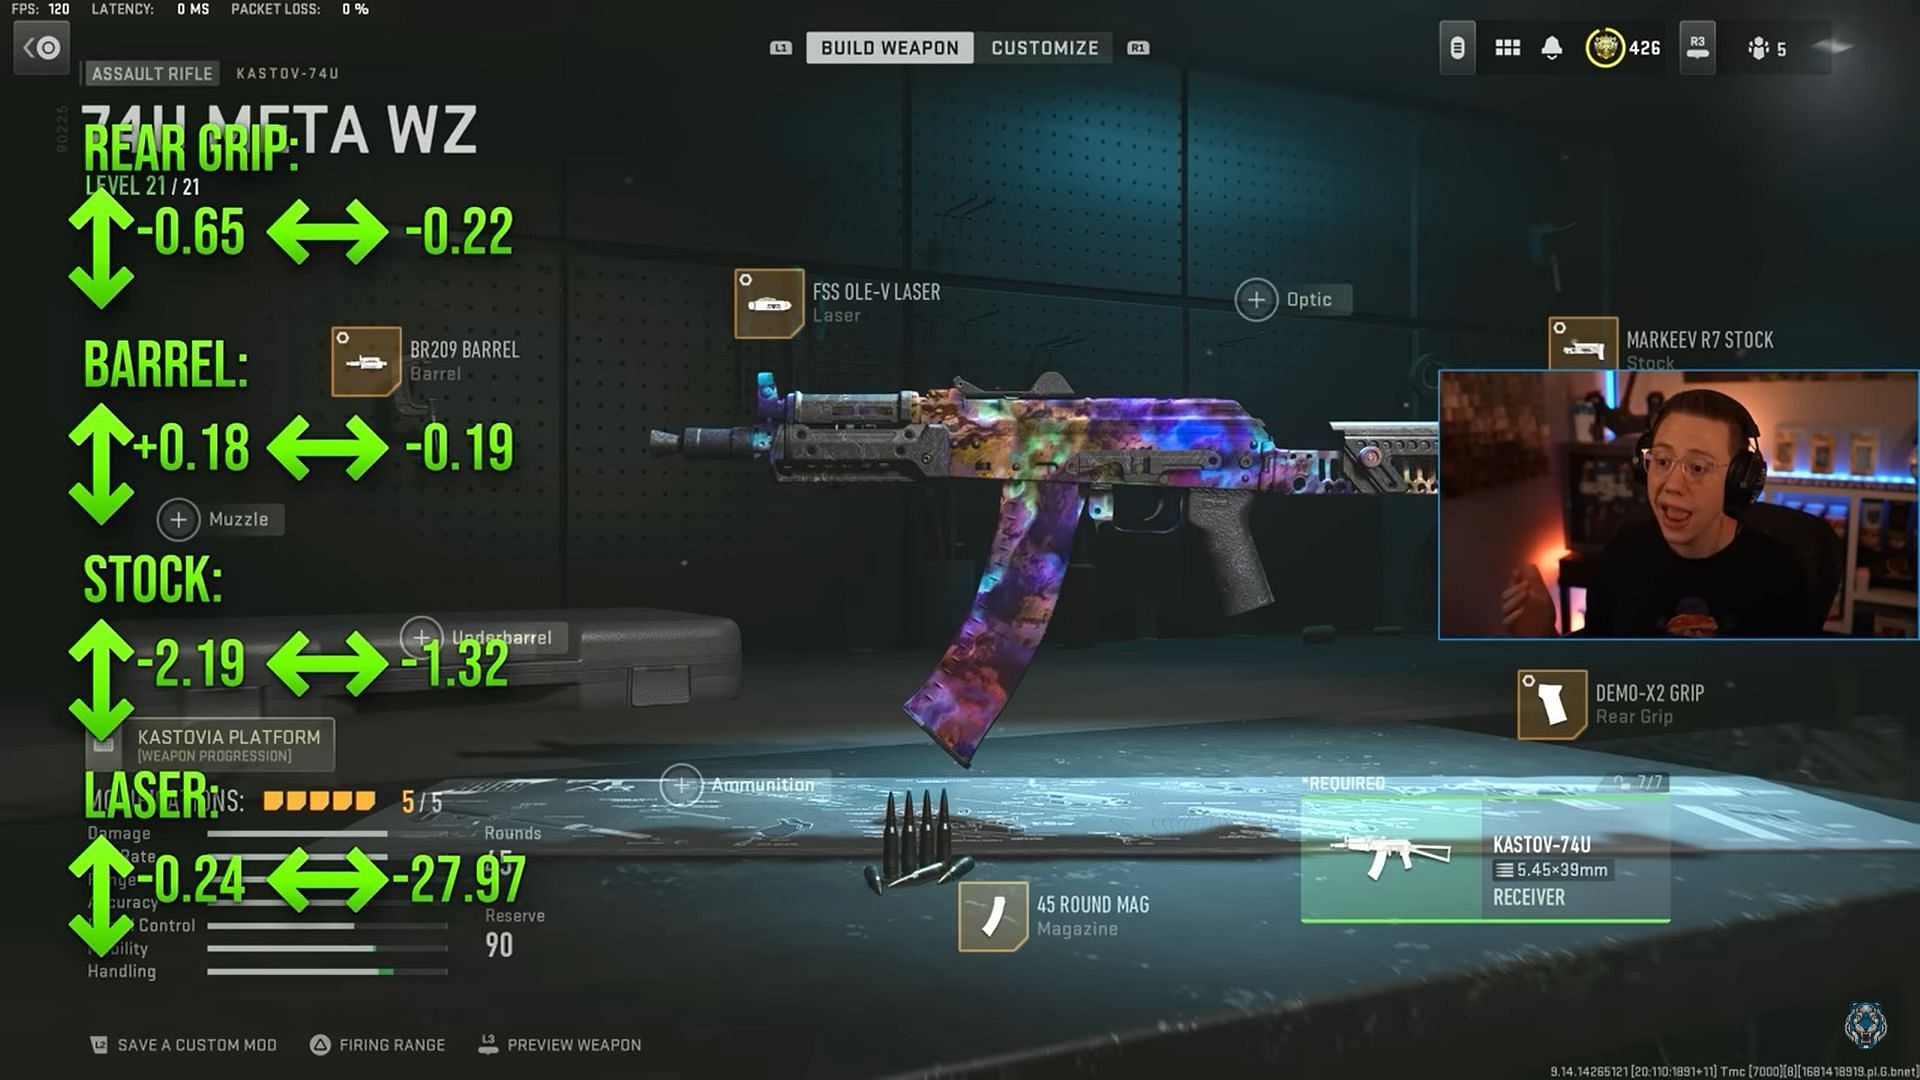 Tuning for Sniper support Kastov-74u (Image via Activision and YouTube/WhosImmortal)